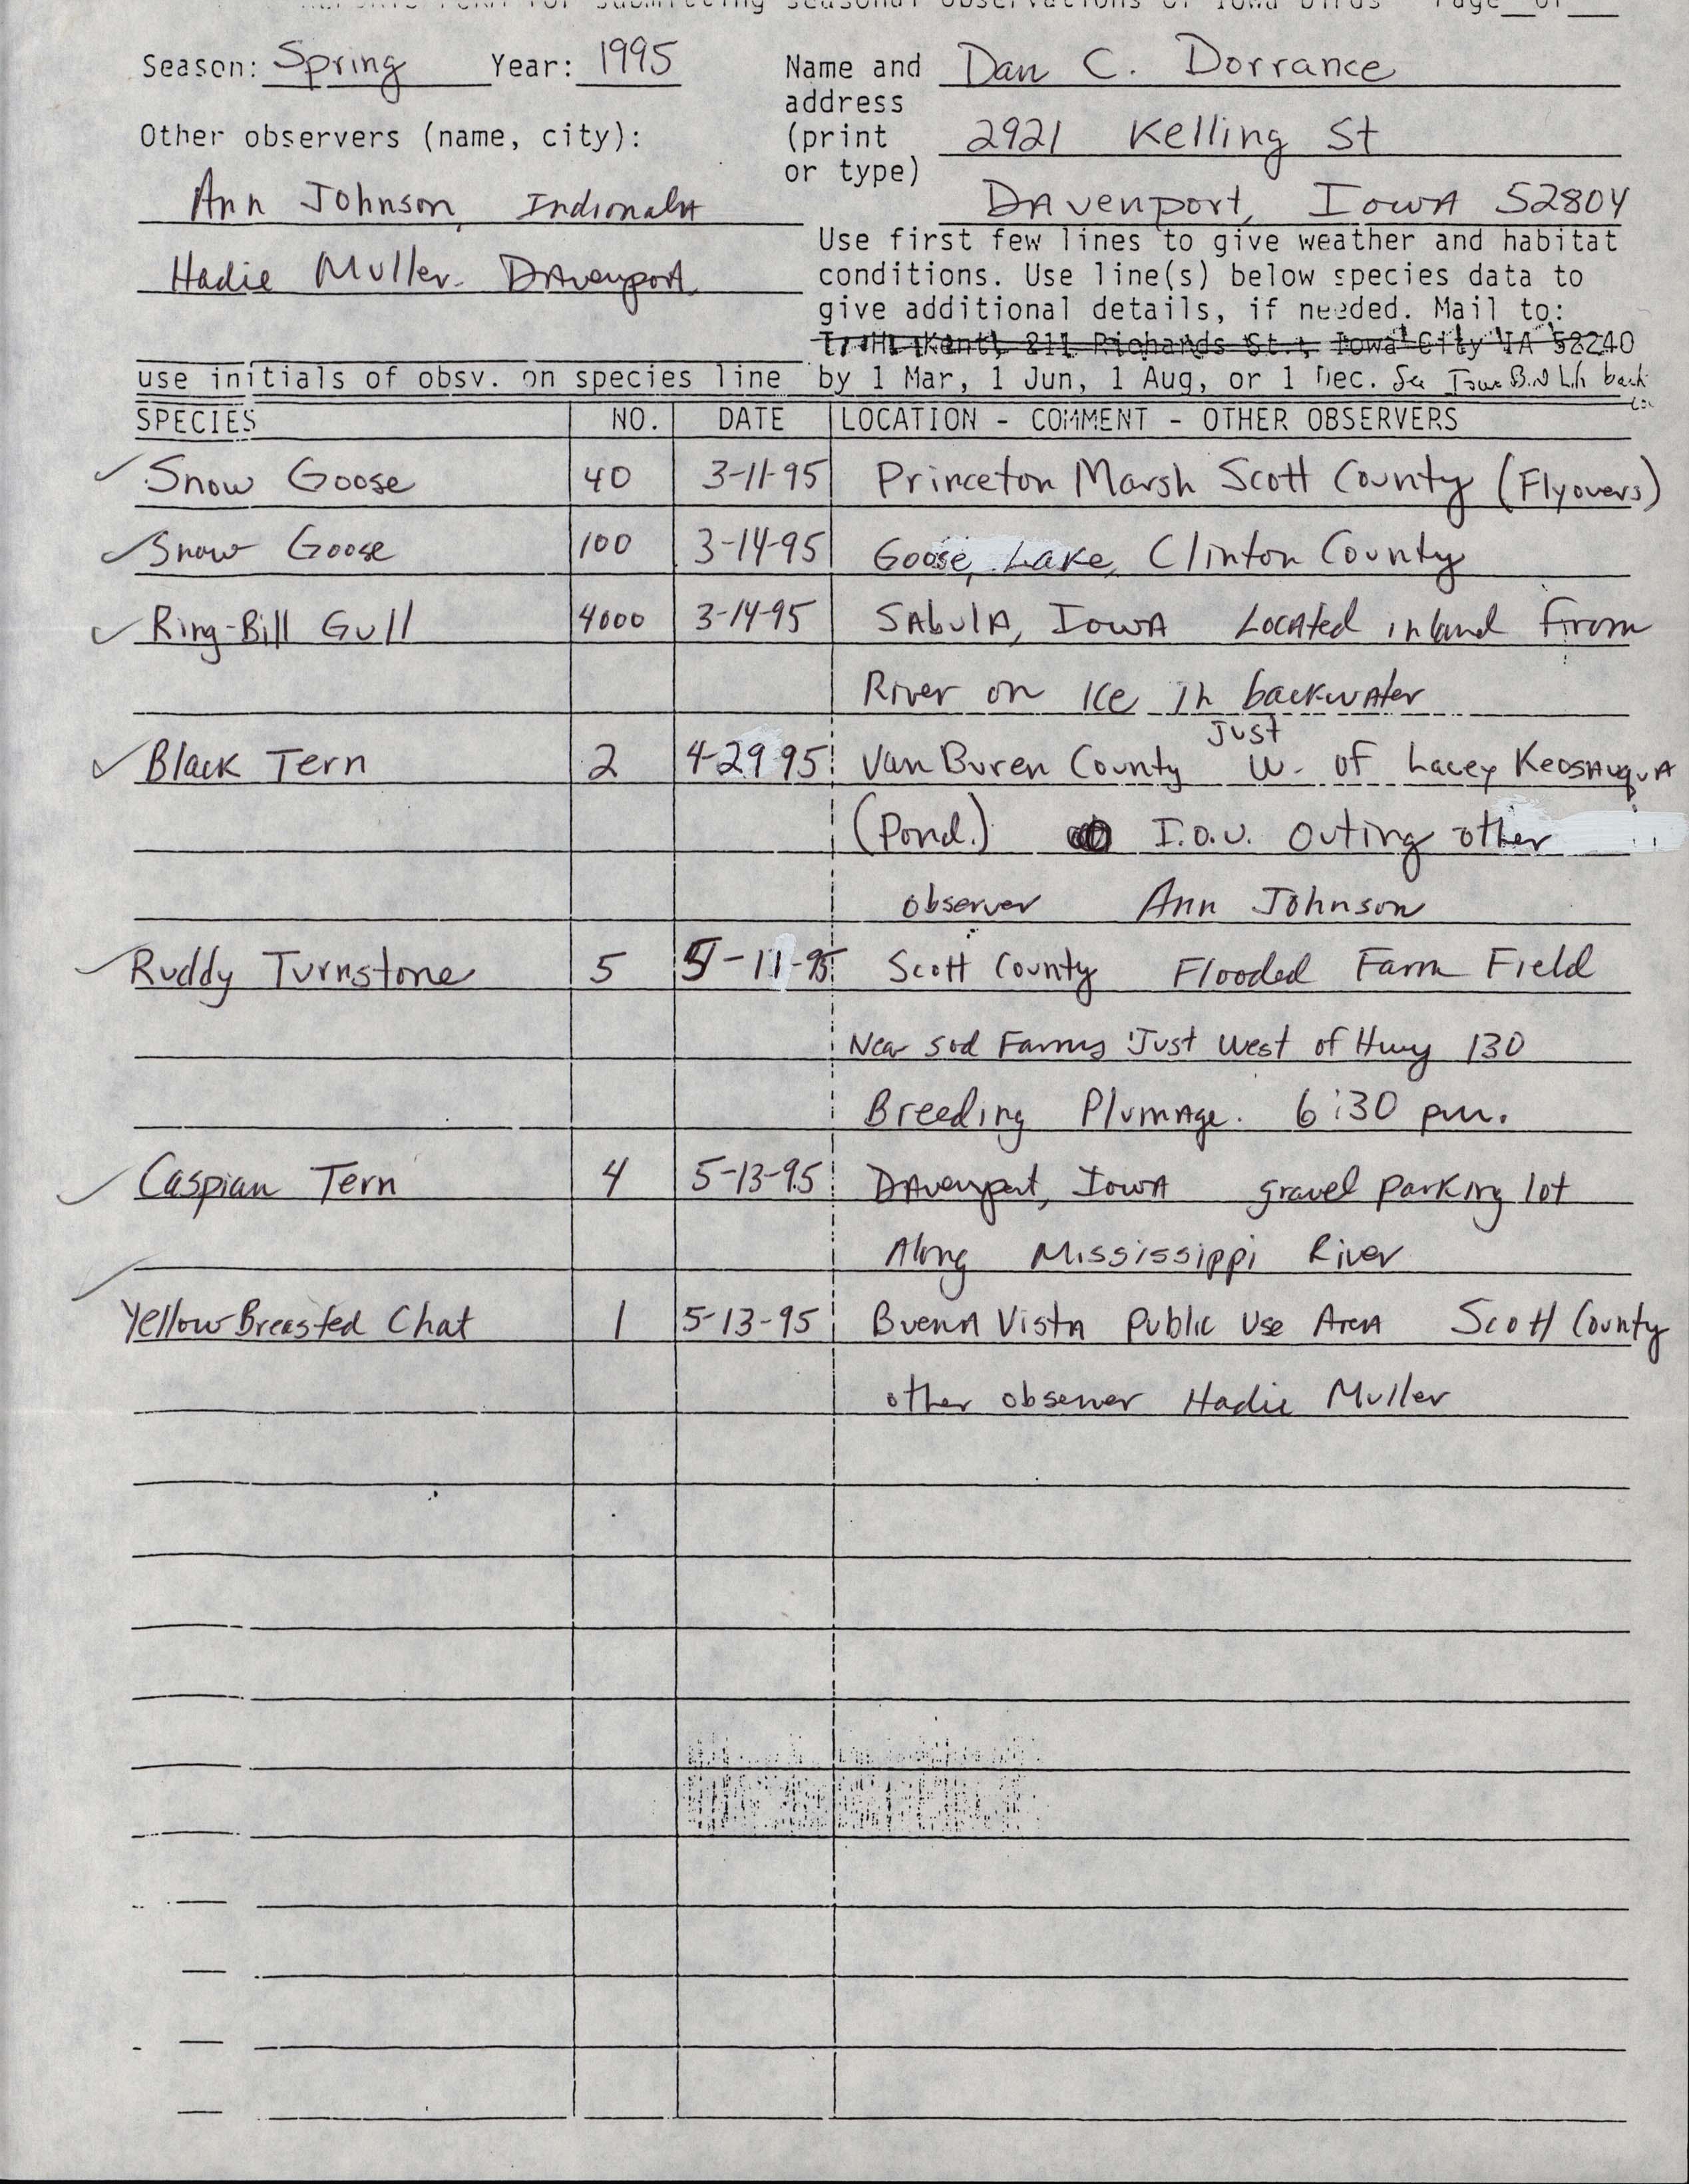 Field reports form for submitting seasonal observations of Iowa birds, spring 1995, Dan Dorrance